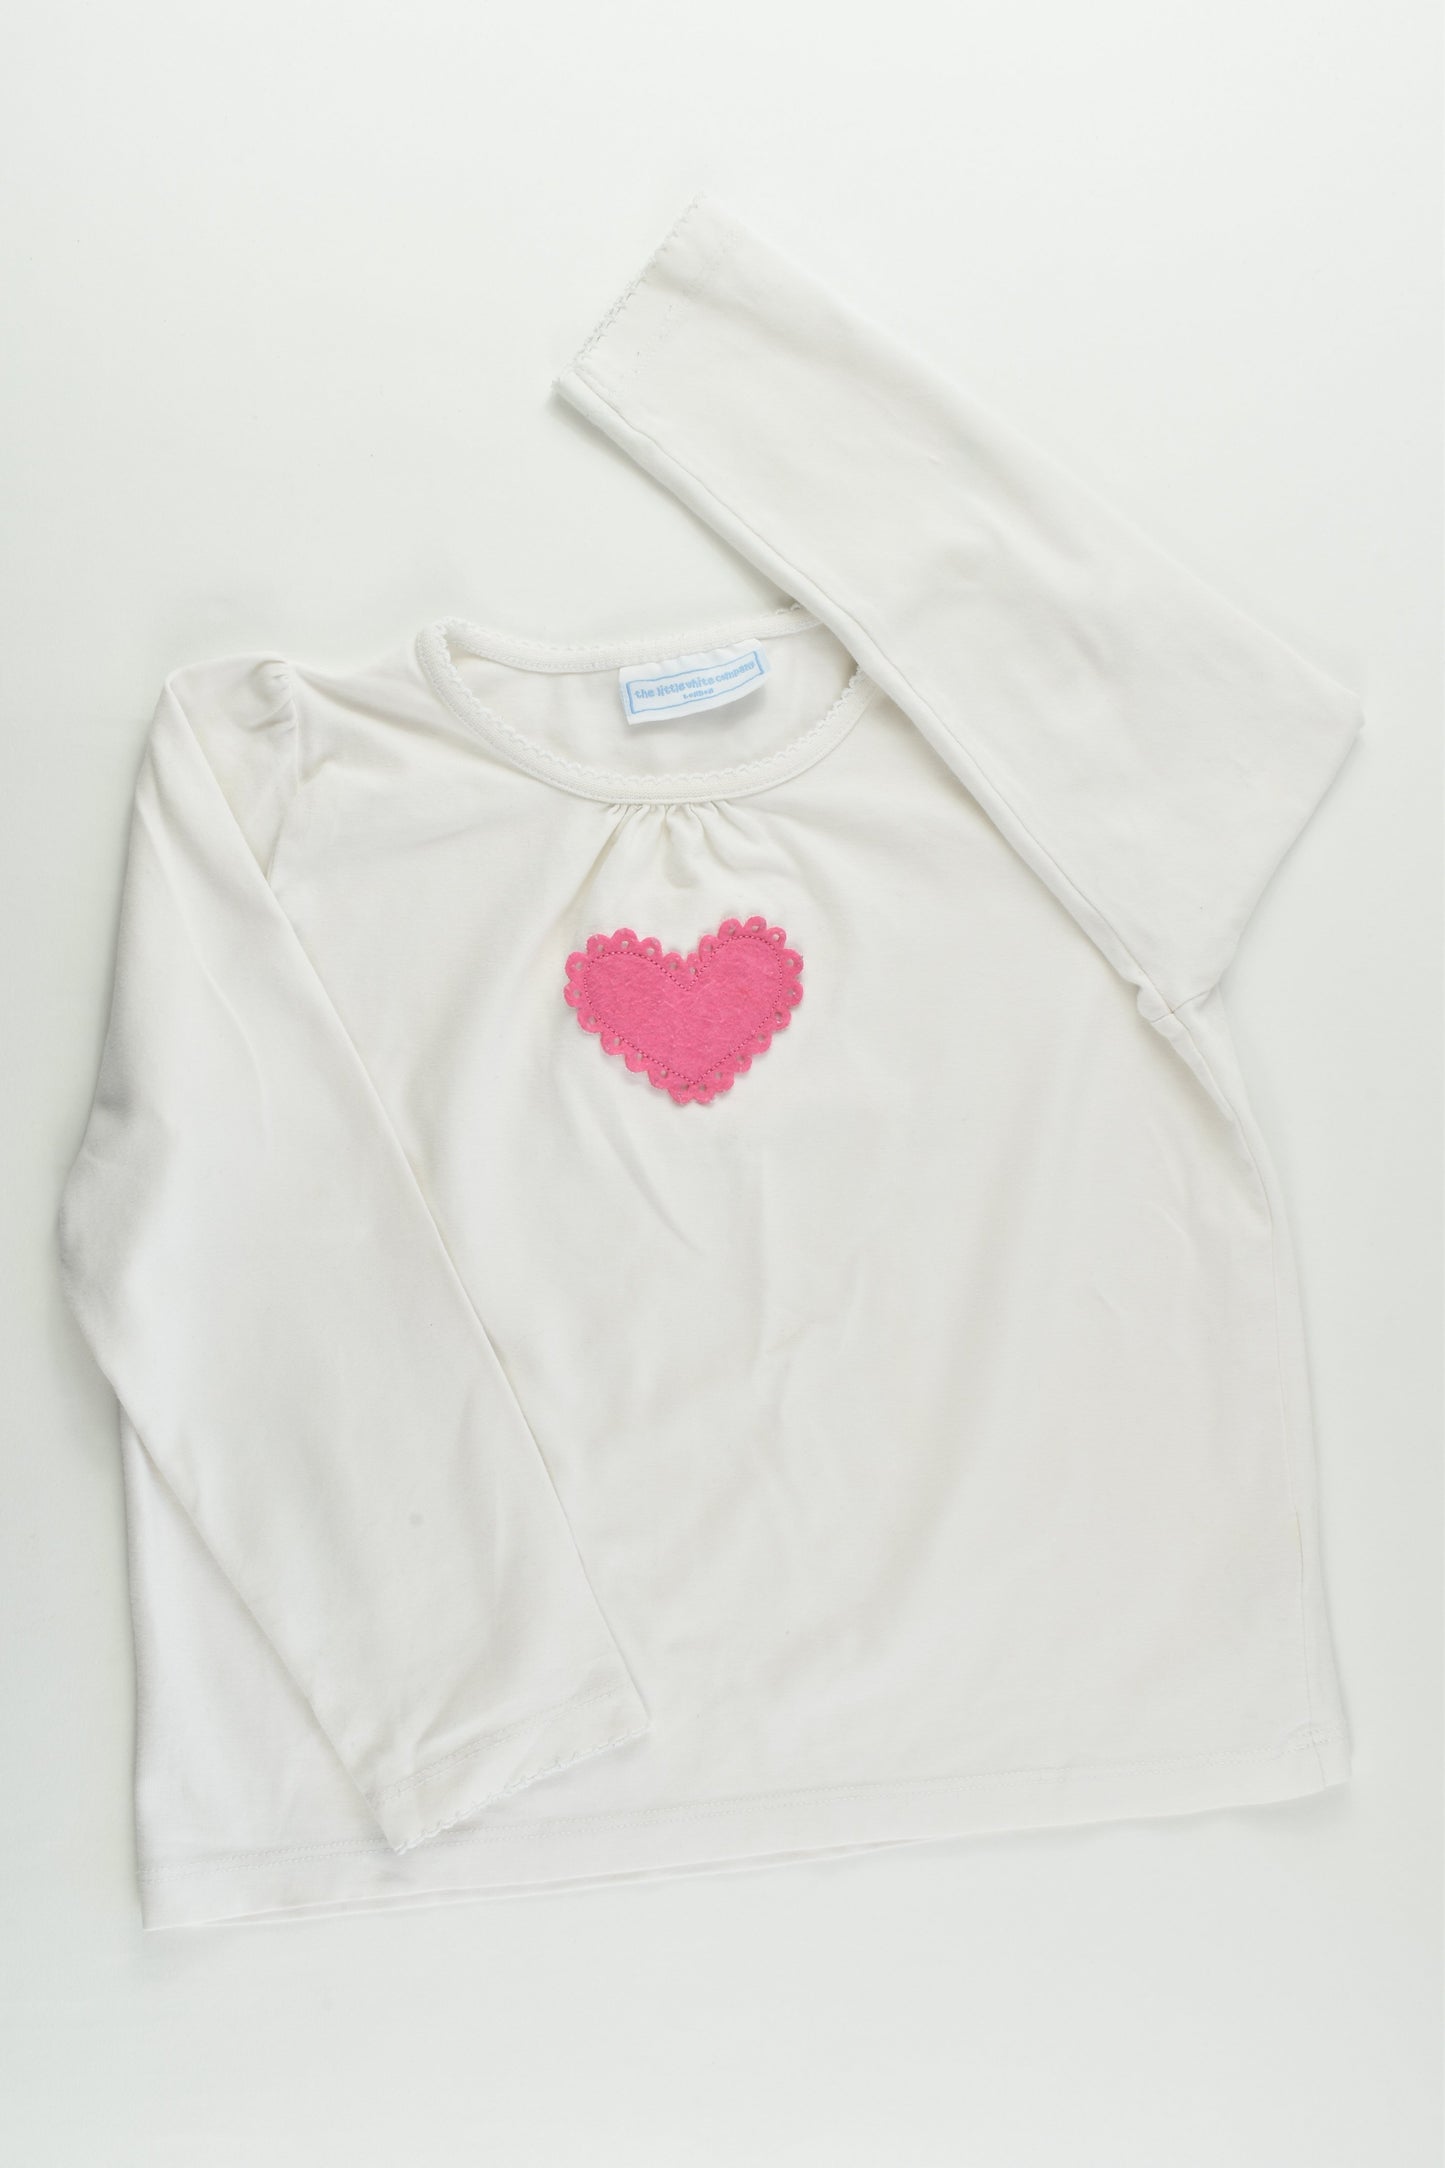 The Little White Company (London) Size 5-6 Love Heart Top